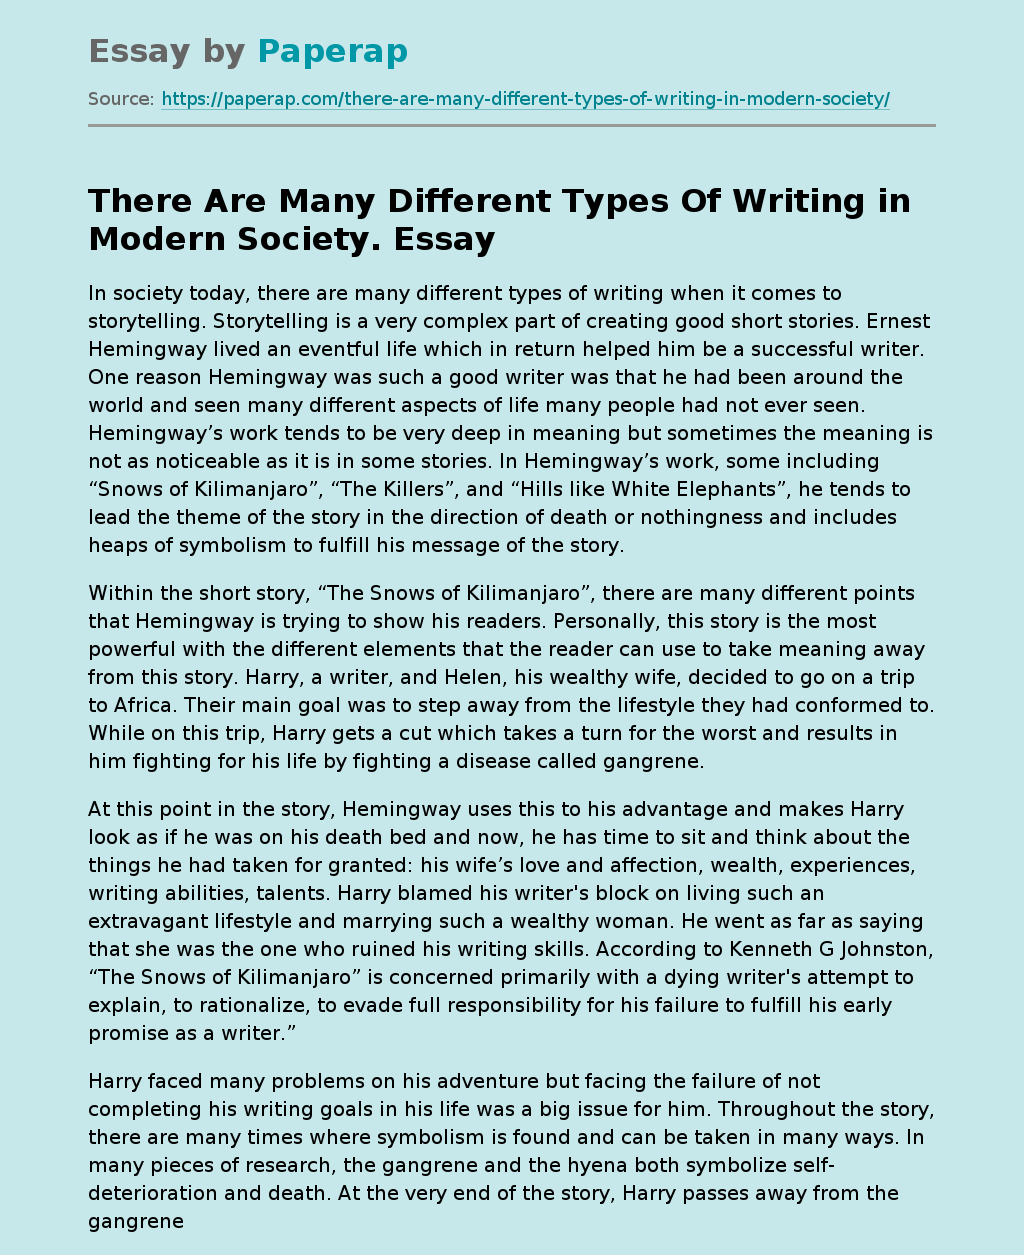 There Are Many Different Types Of Writing in Modern Society.